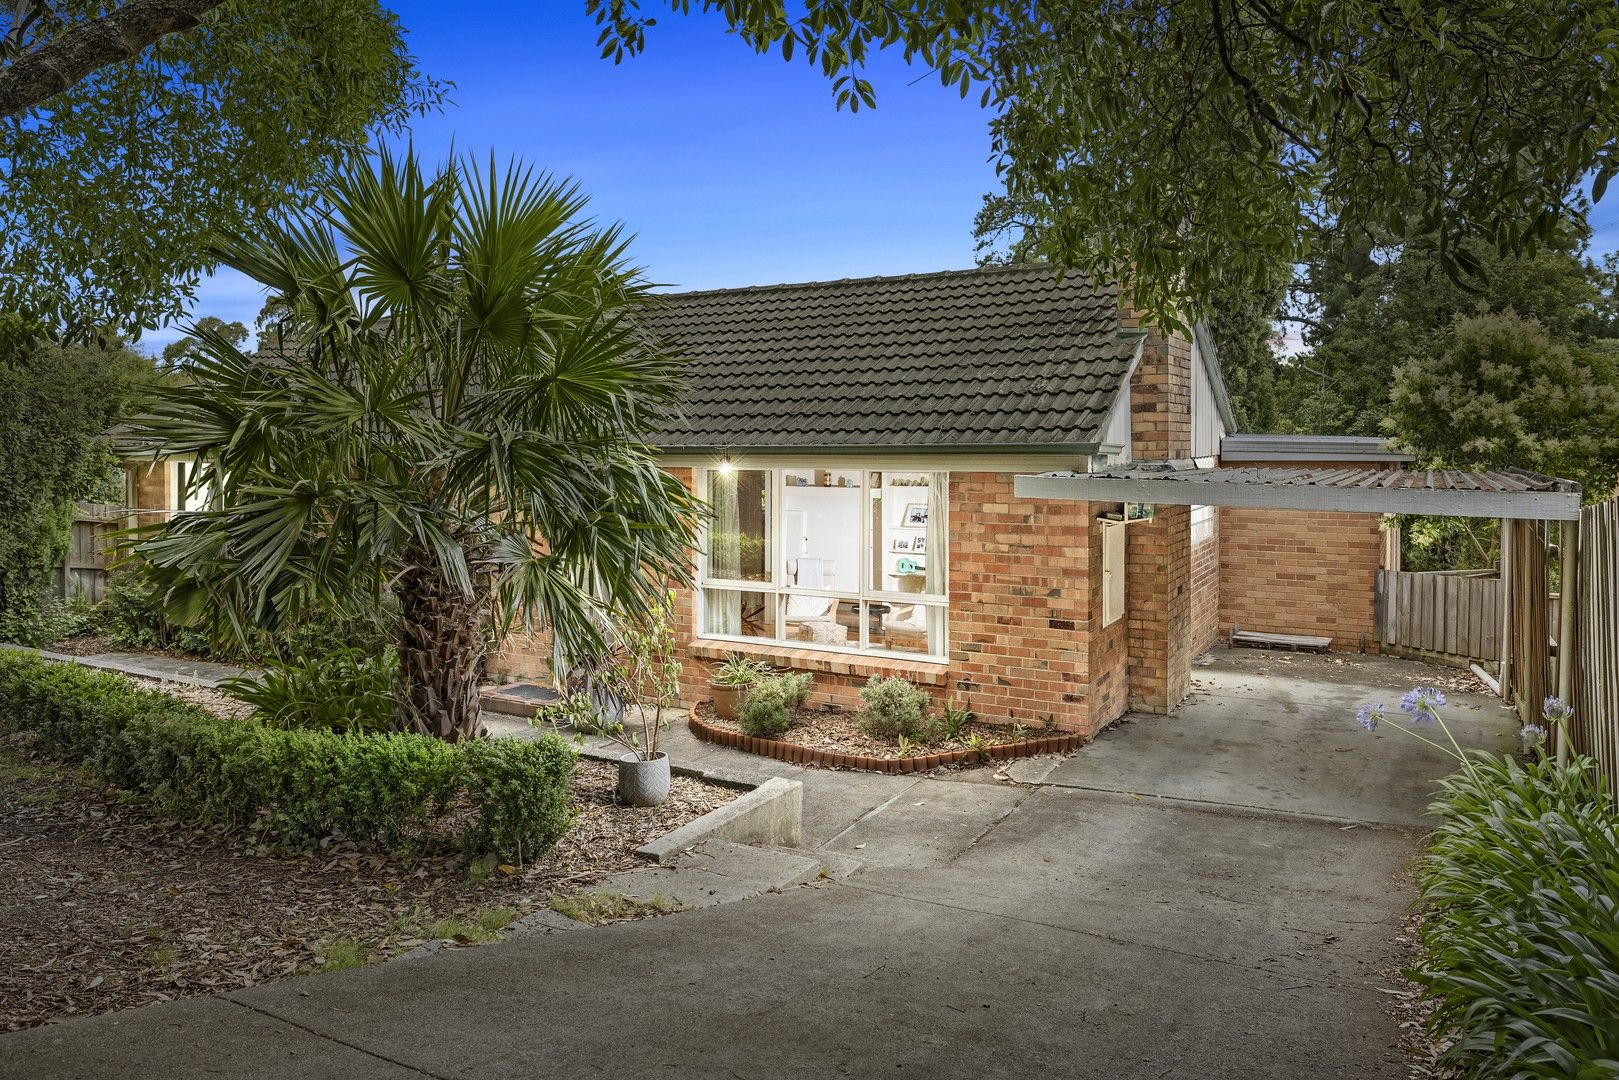 4 bedrooms House in 15 Montalbo Road RINGWOOD NORTH VIC, 3134